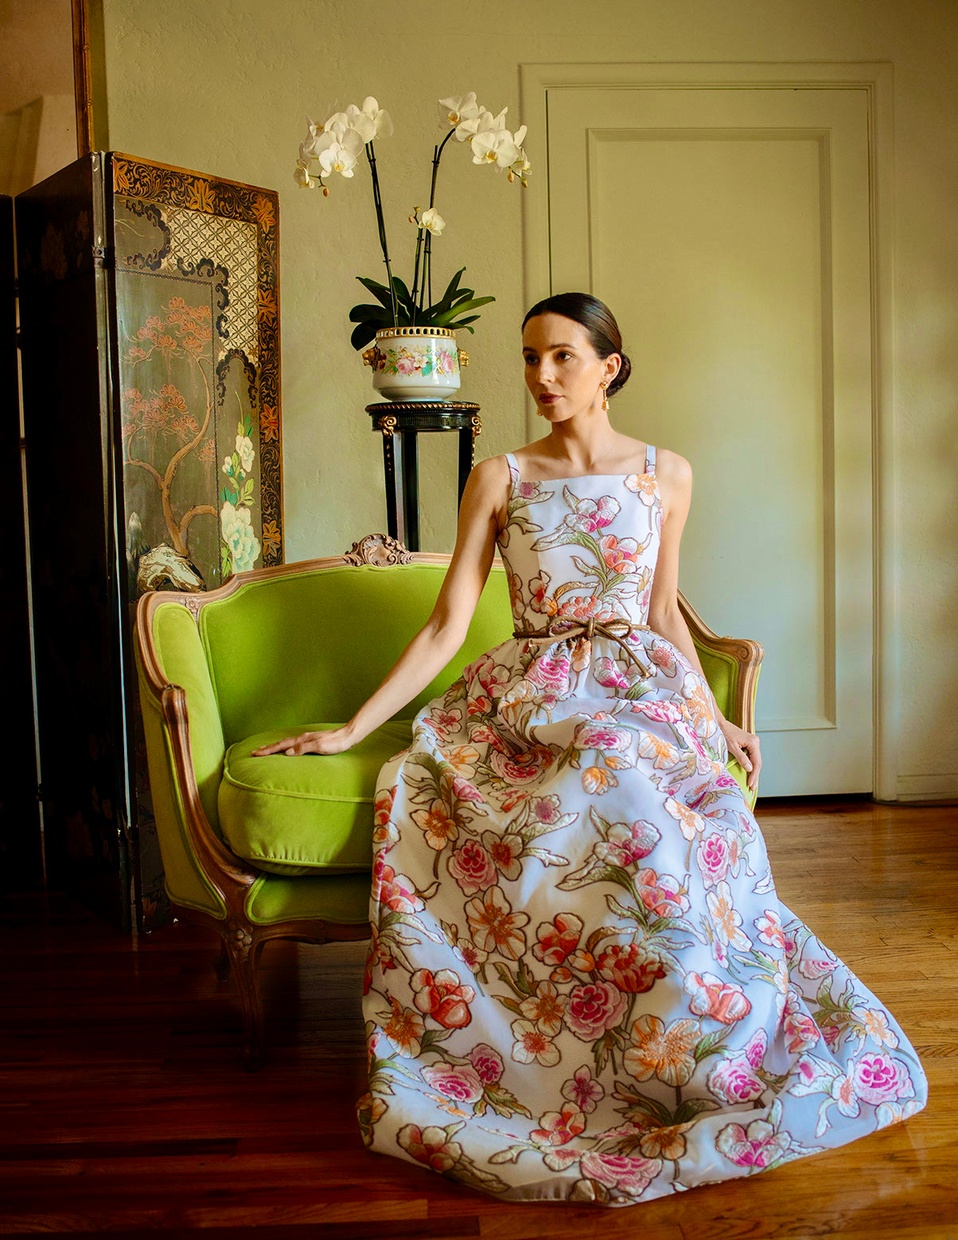 A seated woman looks off camera and wears a floor length, full-skirted, white dress with no sleeves that is embroidered with pink and orange flowers.